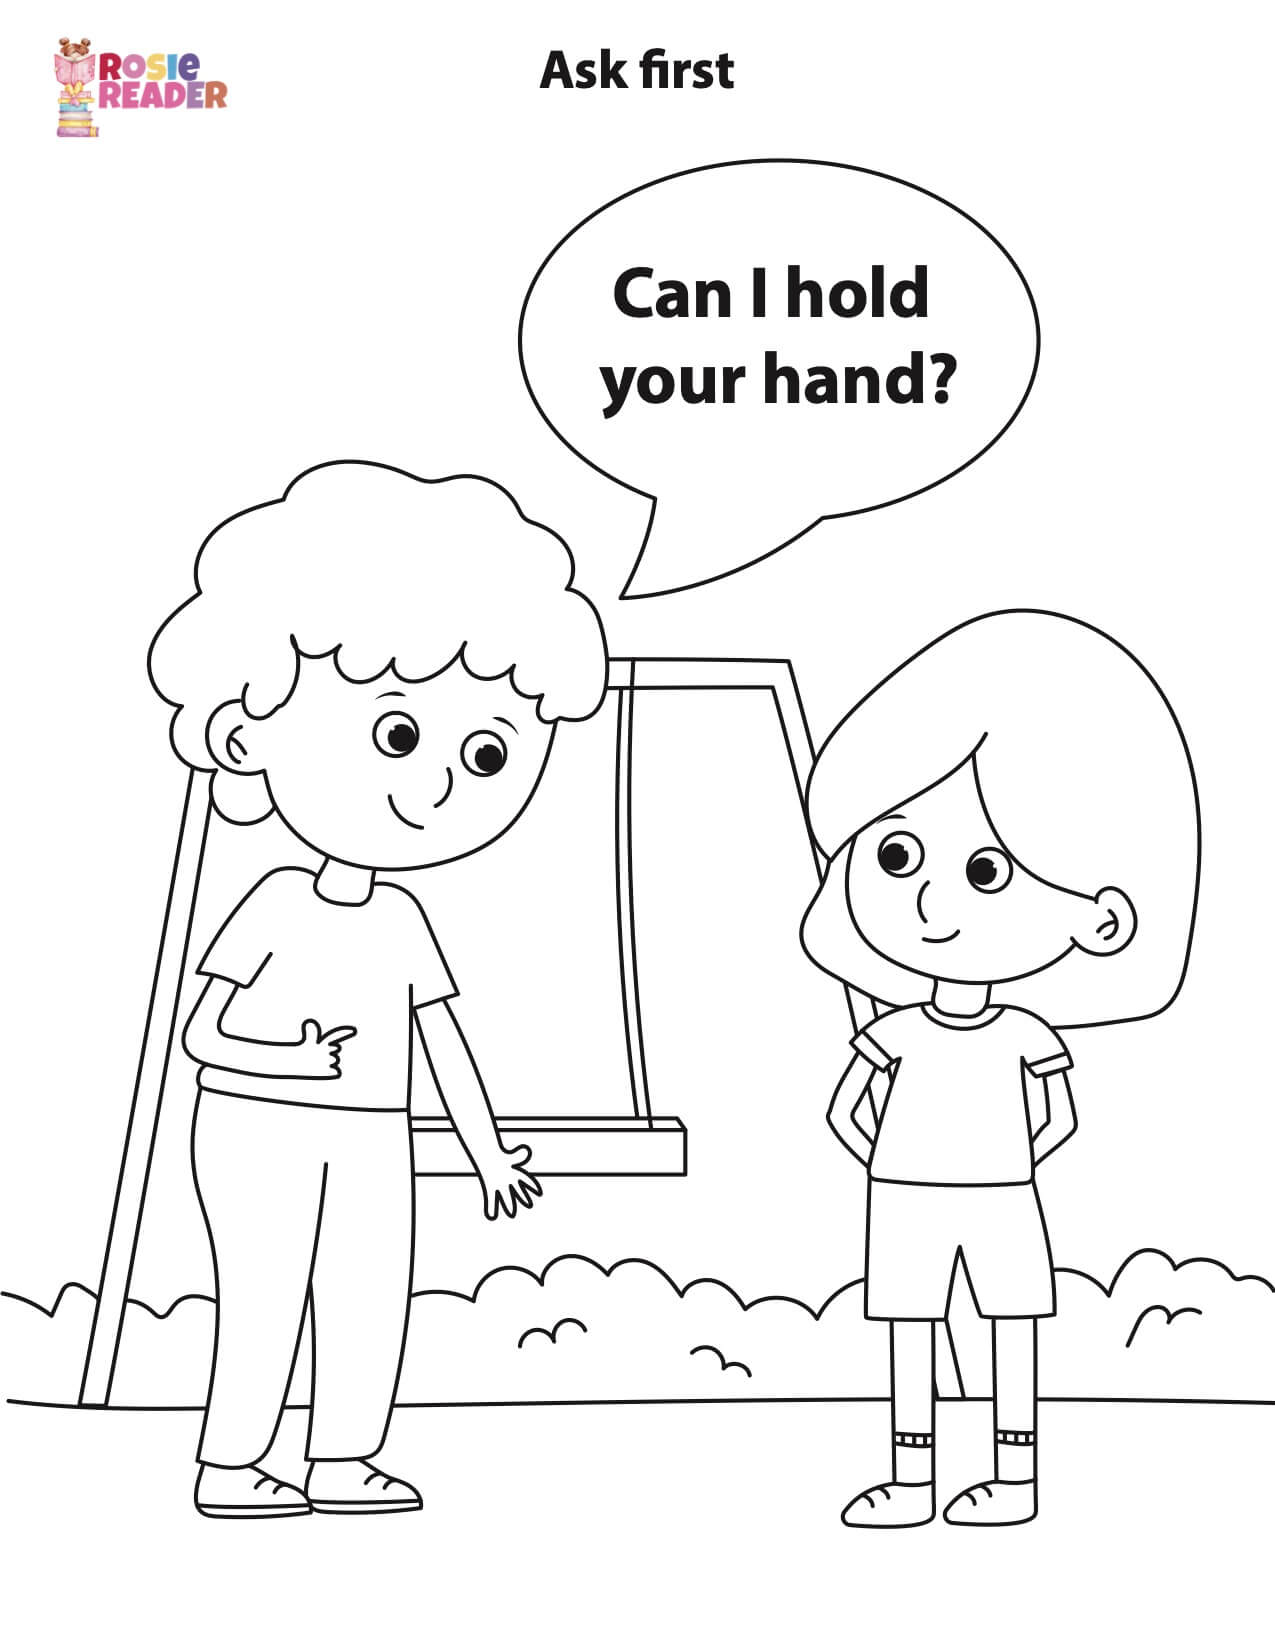 consent coloring page